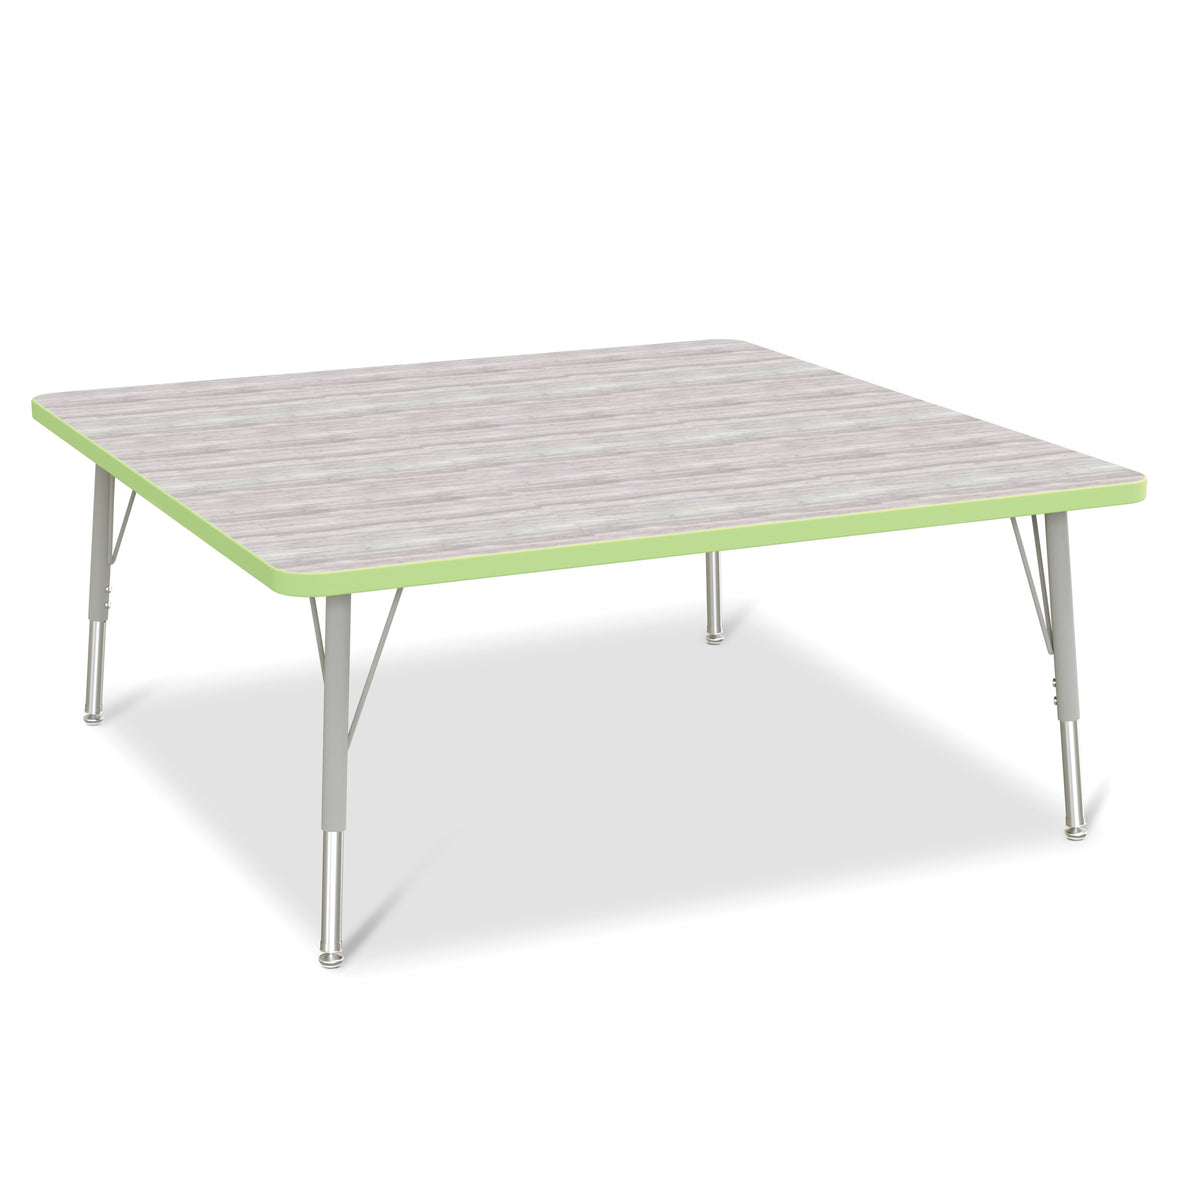 6418JCE451, Berries Square Activity Table - 48" X 48", E-height - Driftwood Gray/Key Lime/Gray